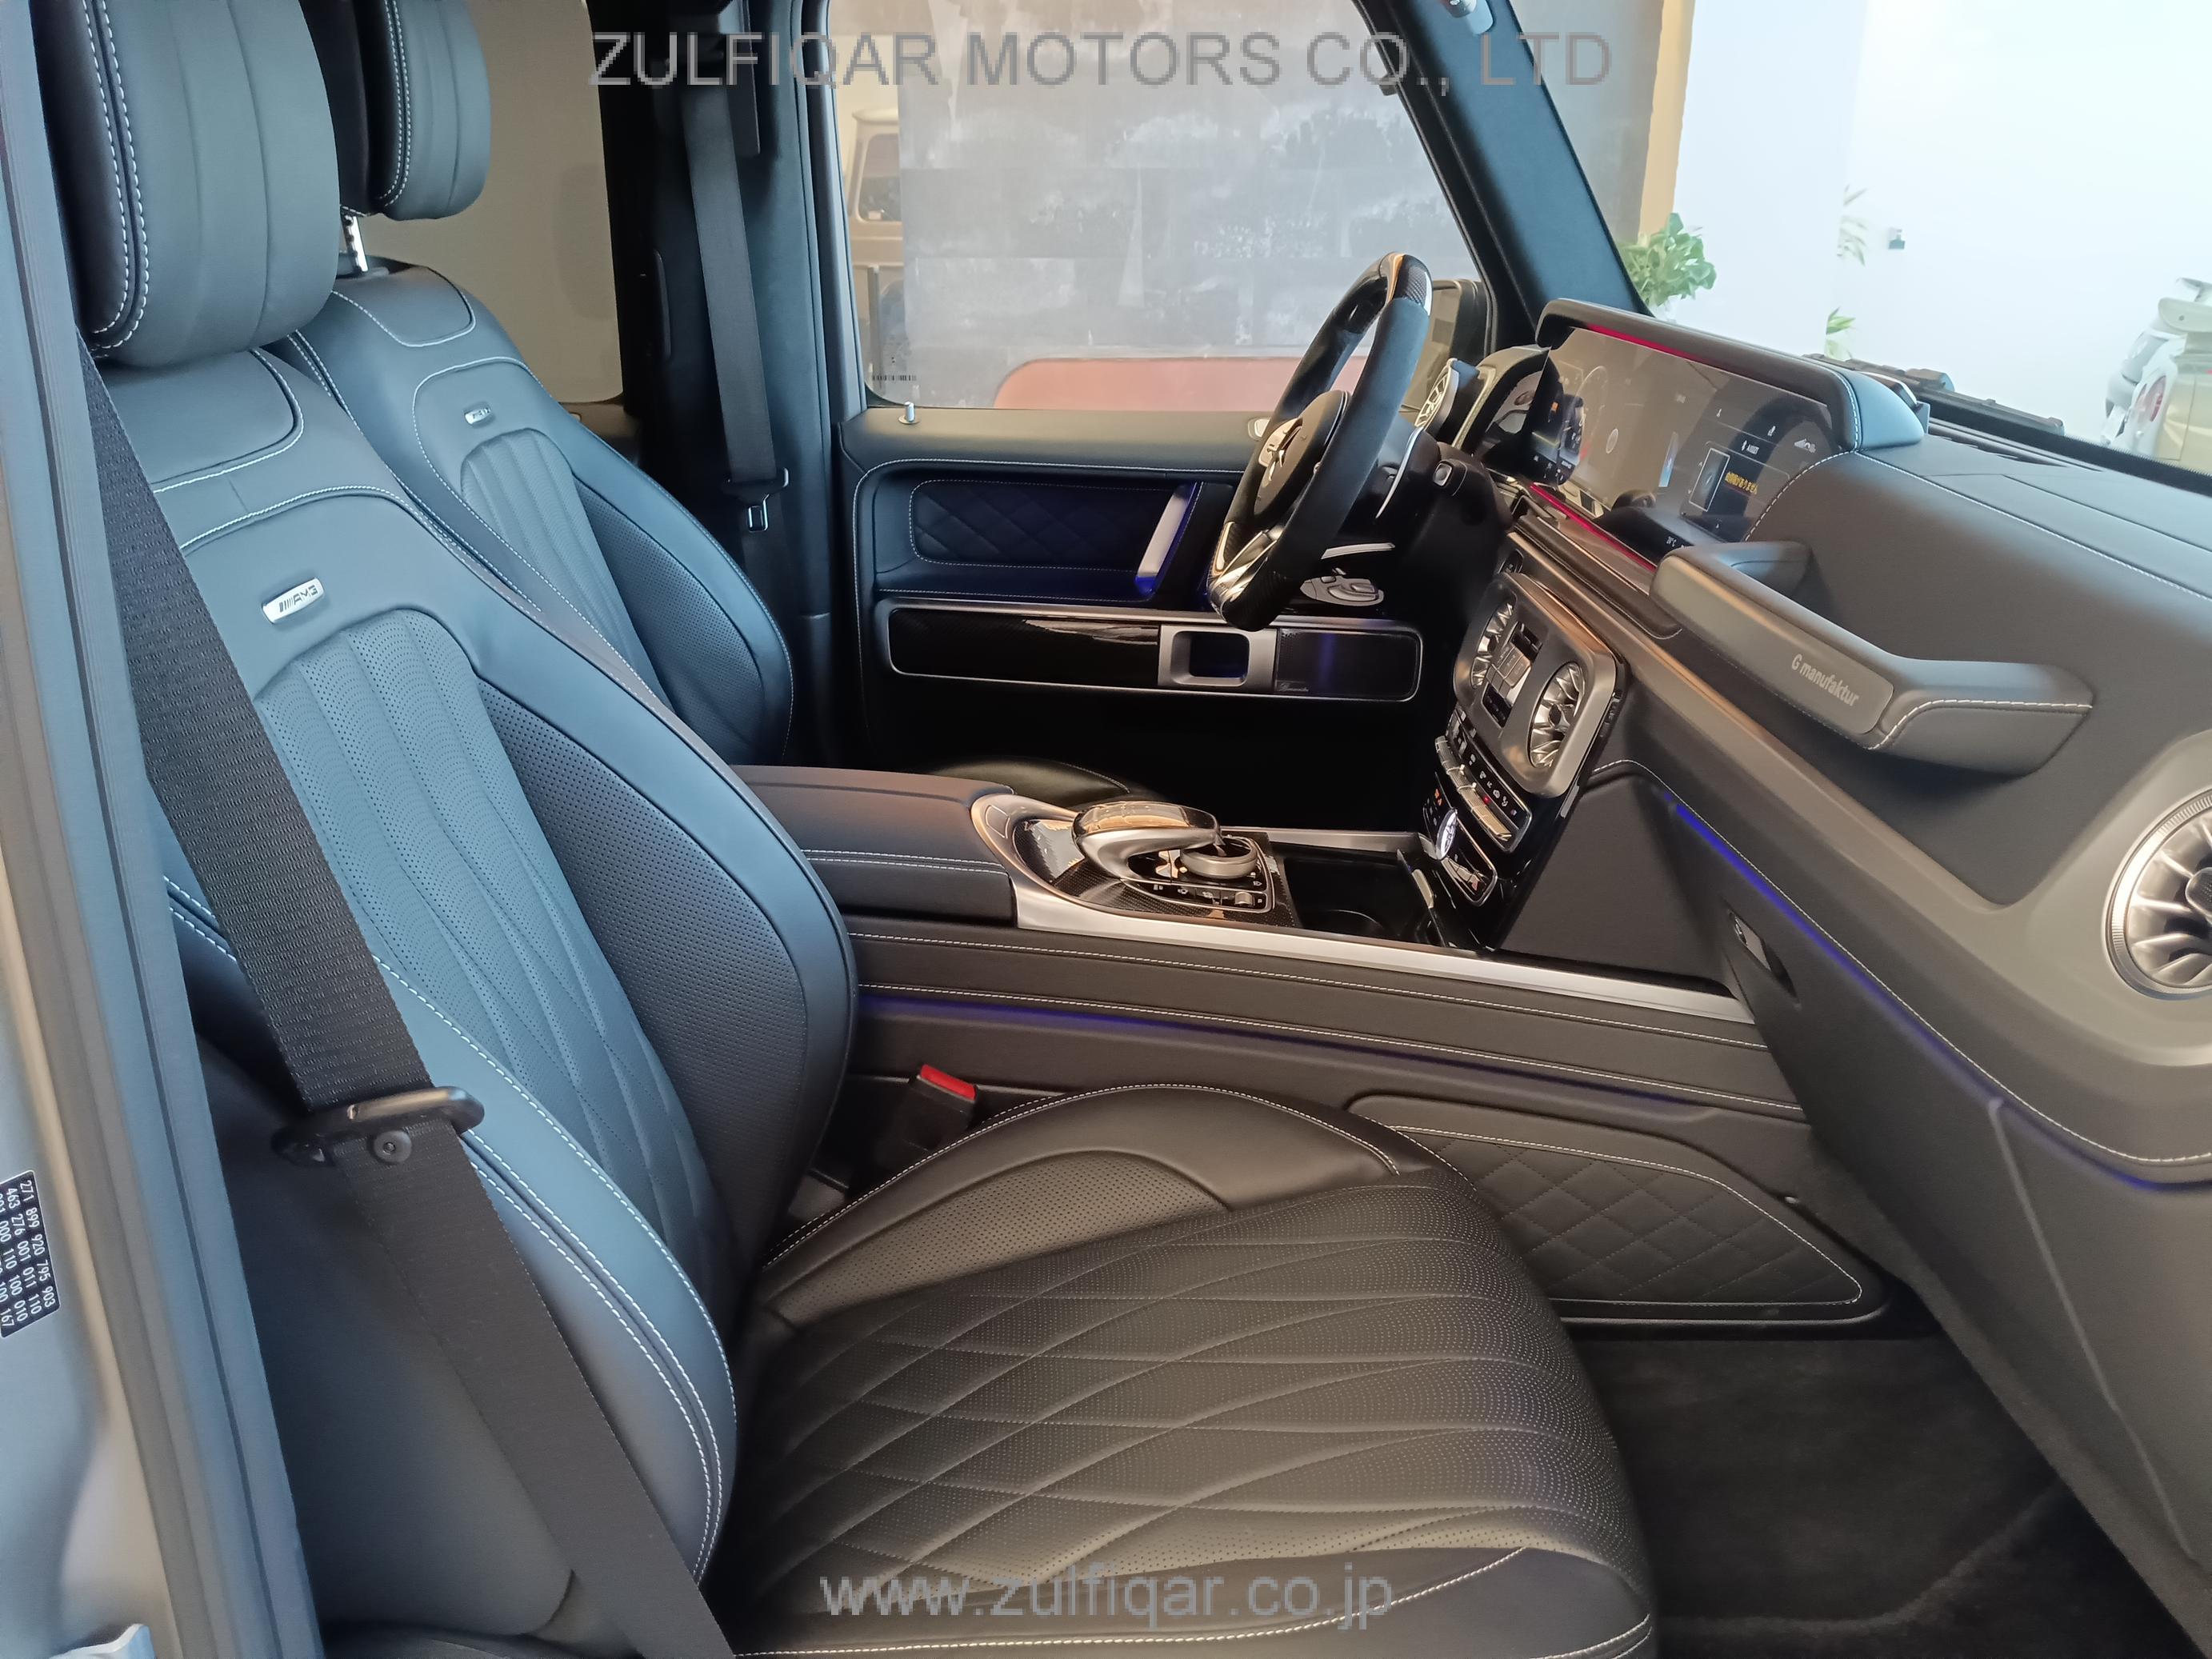 MERCEDES AMG G CLASS 2021 Image 57